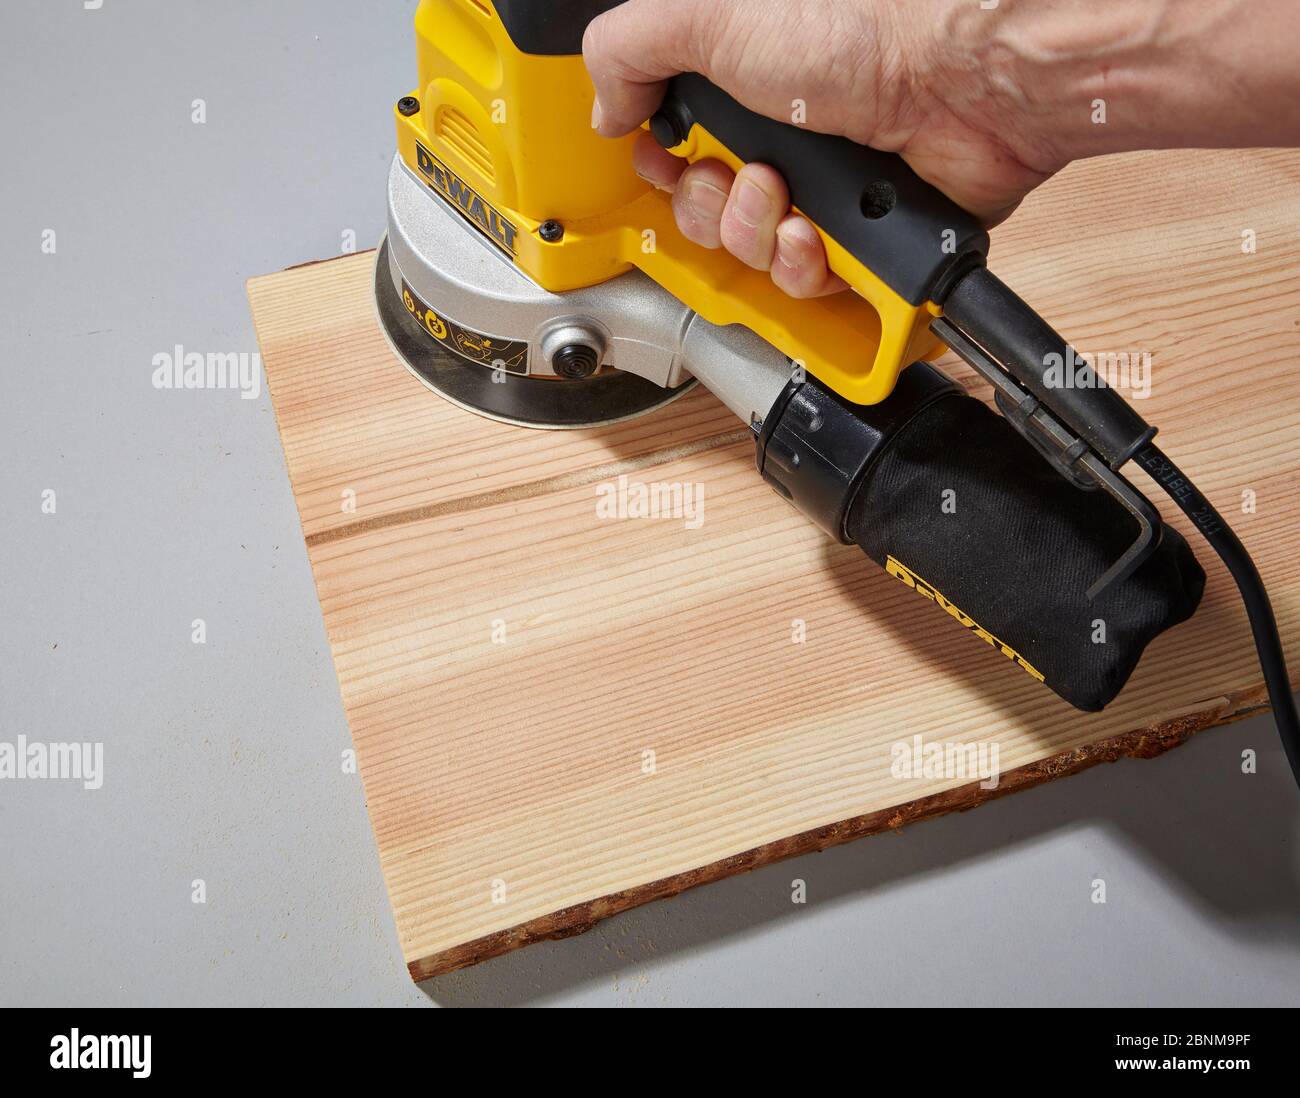 Construction of a wooden shelf, do-it-yourself production, step-by-step, step 1 sanding Stock Photo